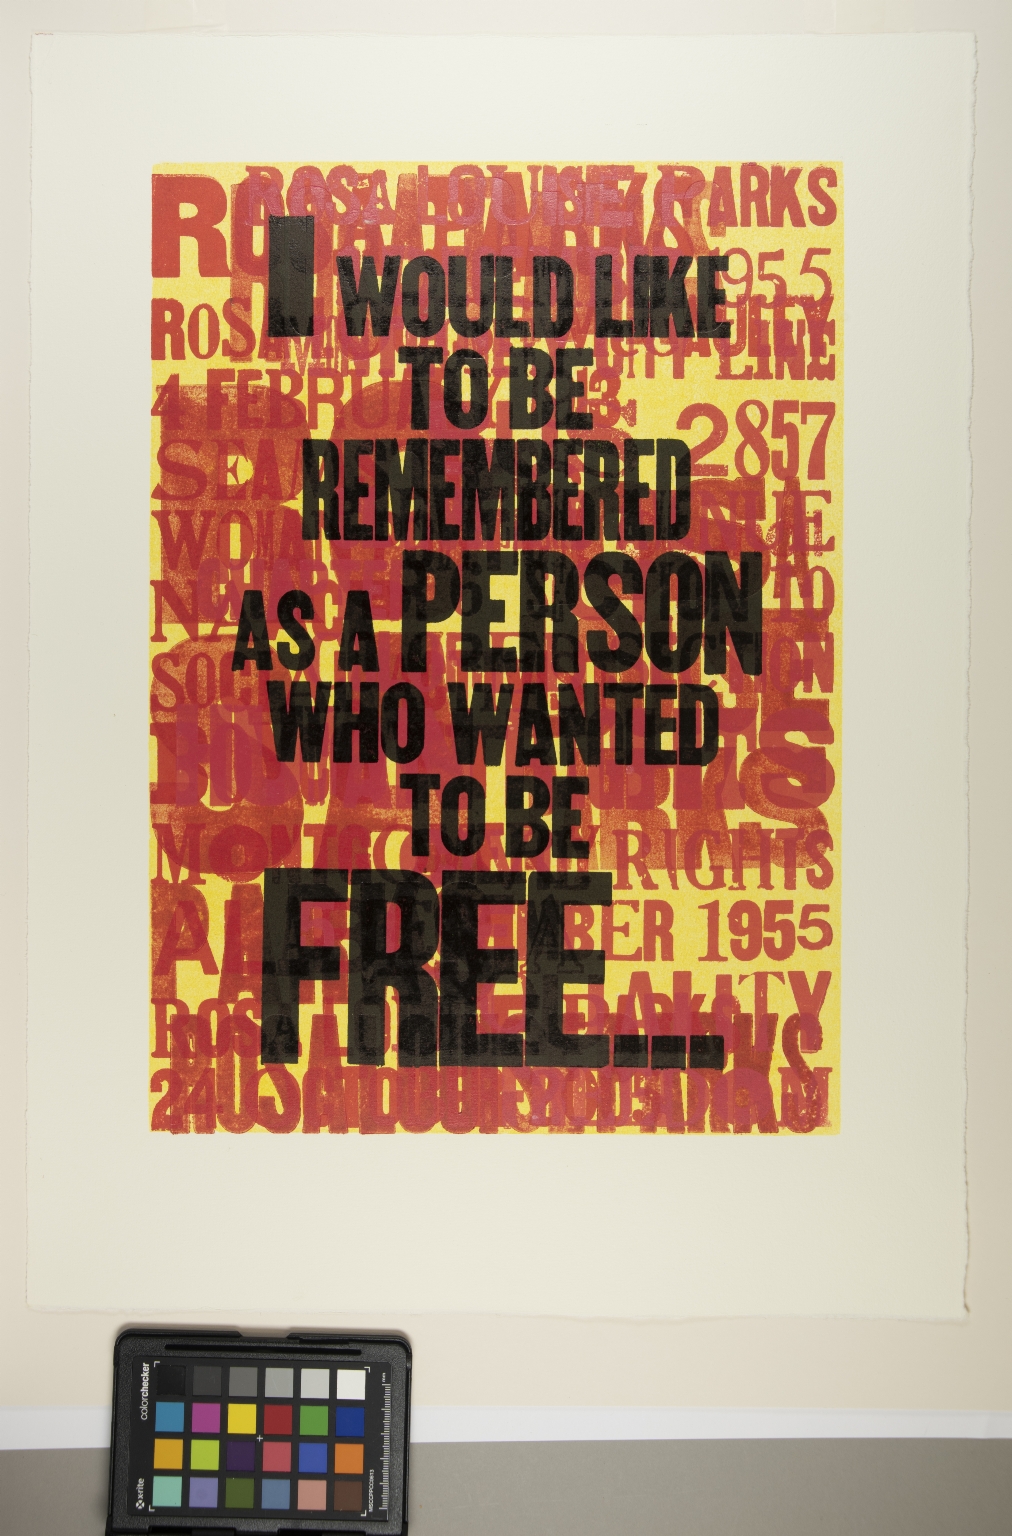 Fourteen Quotes from Rosa Louise Parks, Civil Rights Activist: "I would like to be remembered as a person who wanted to be free..."